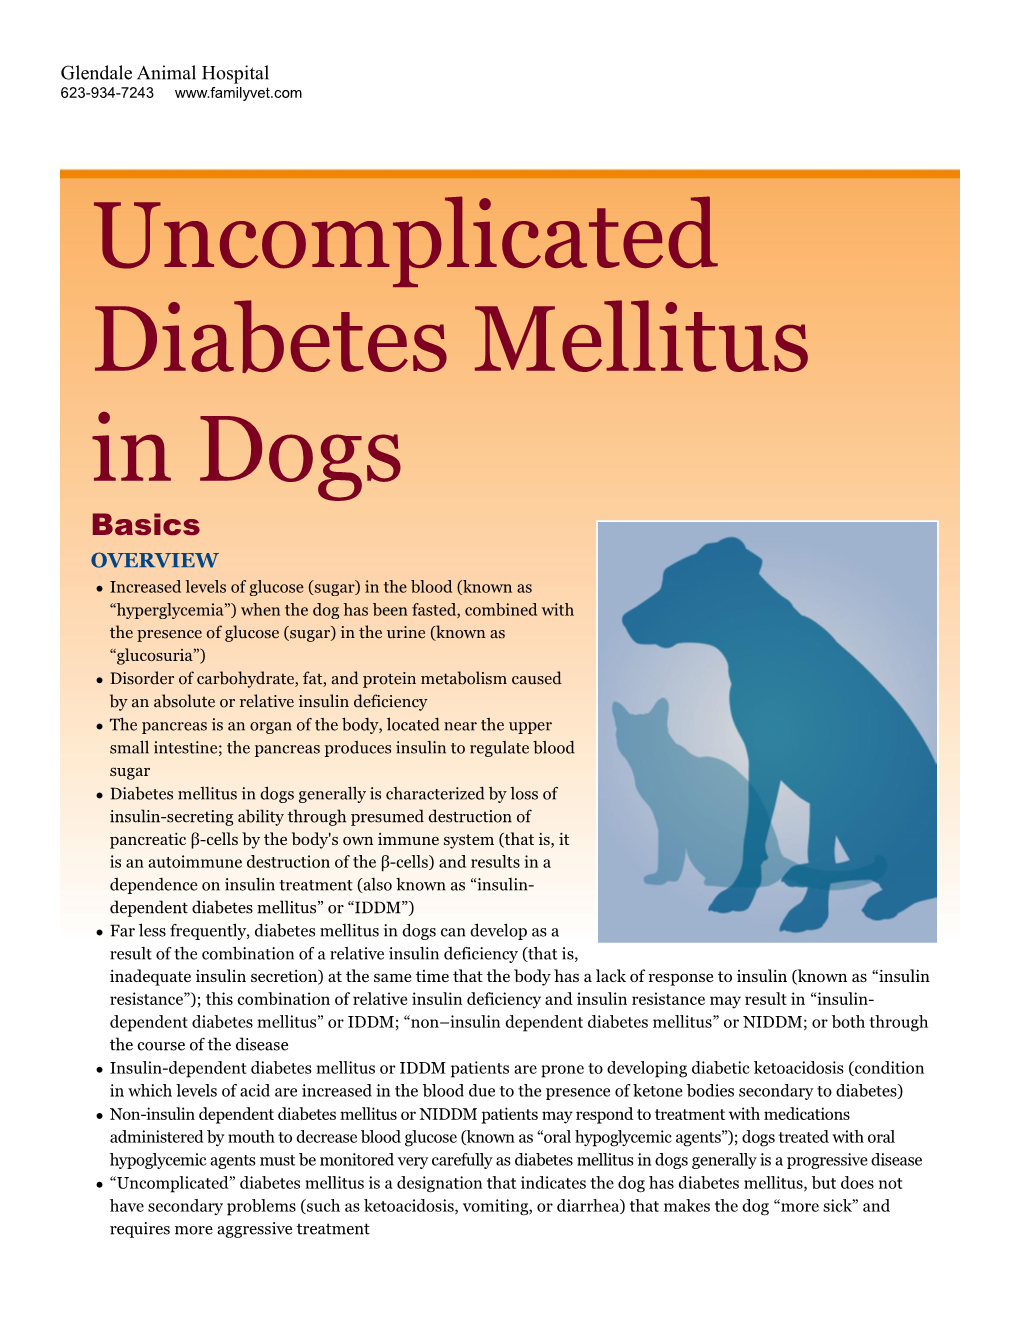 Uncomplicated Diabetes Mellitus in Dogs